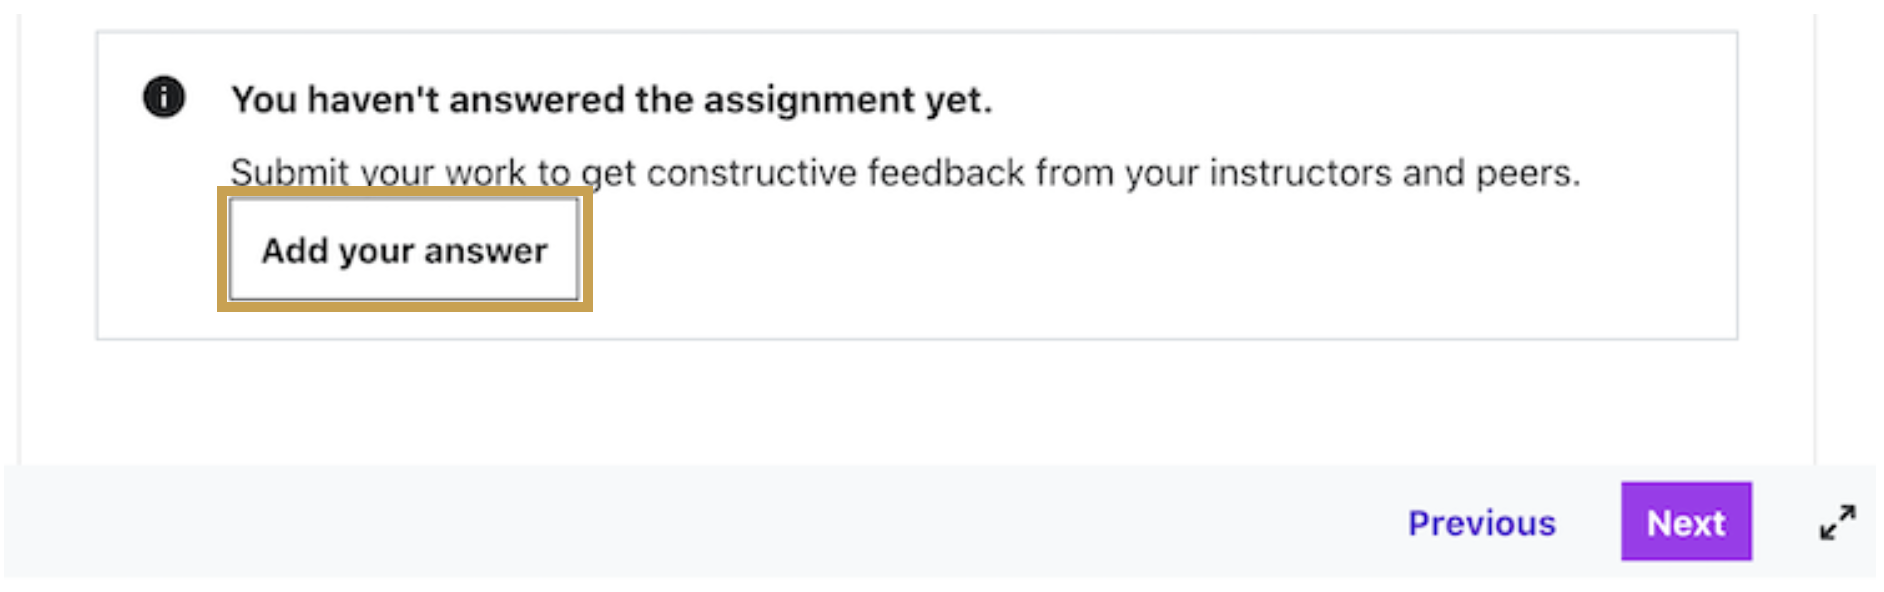 assignment_add_your_answer_ub.png